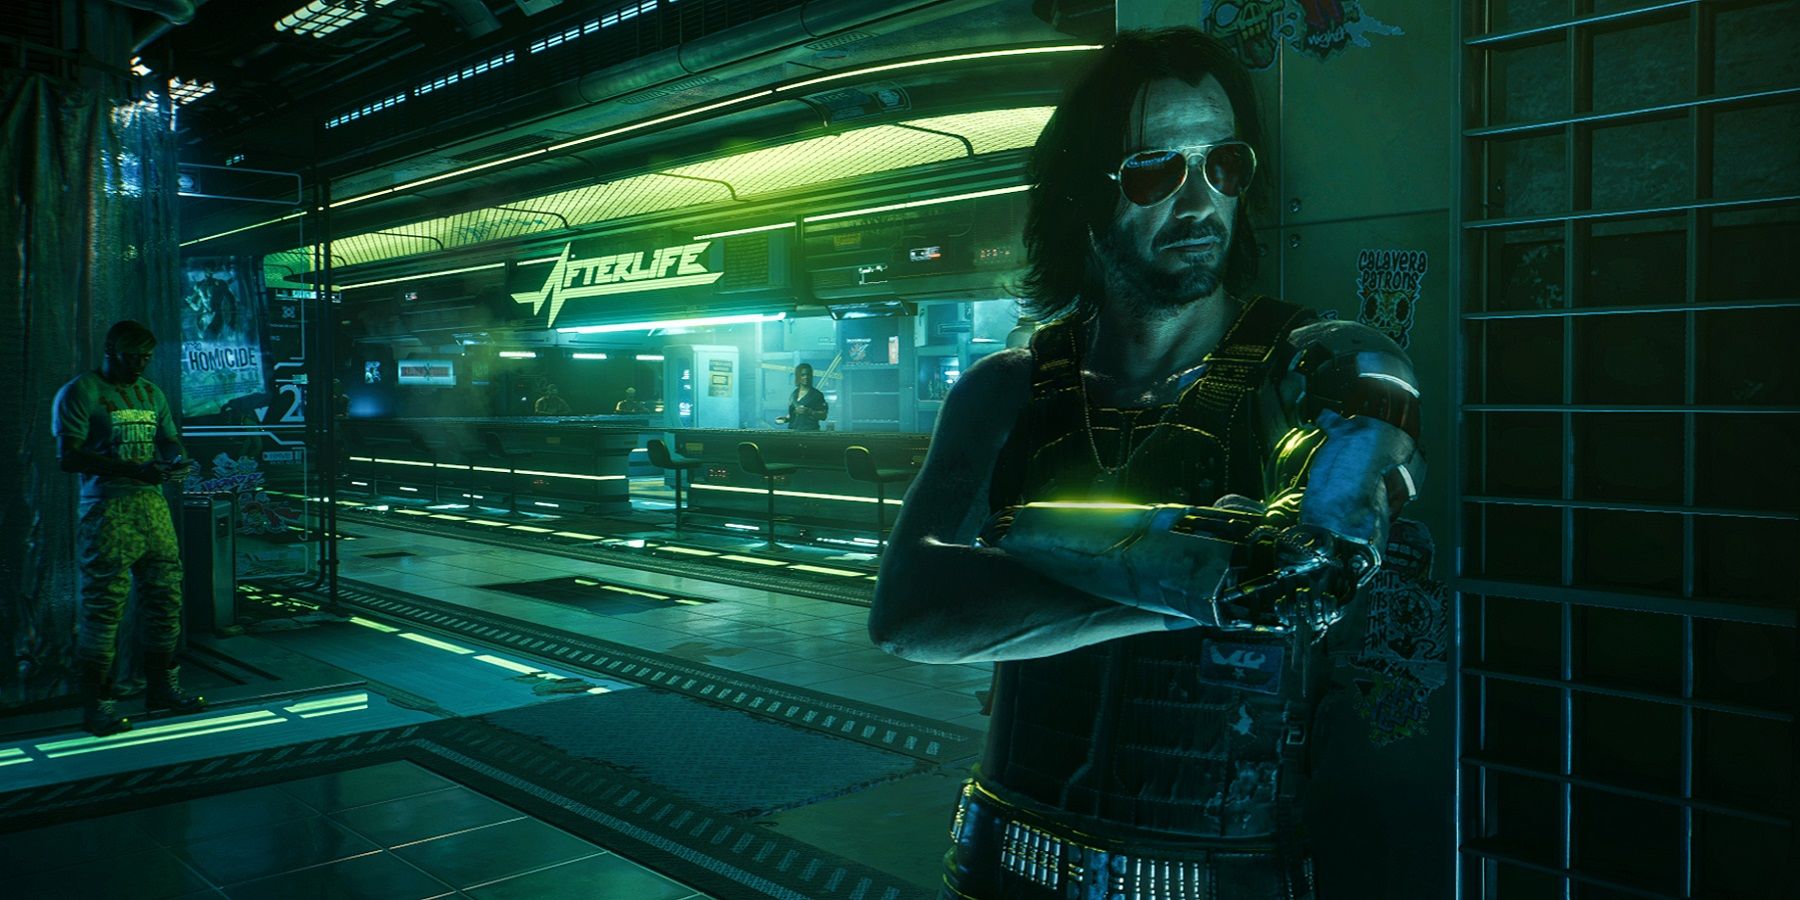 Image from Cyberpunk 2077 showing Johnny Silverhand leaning on a wall in the Afterlife night club.